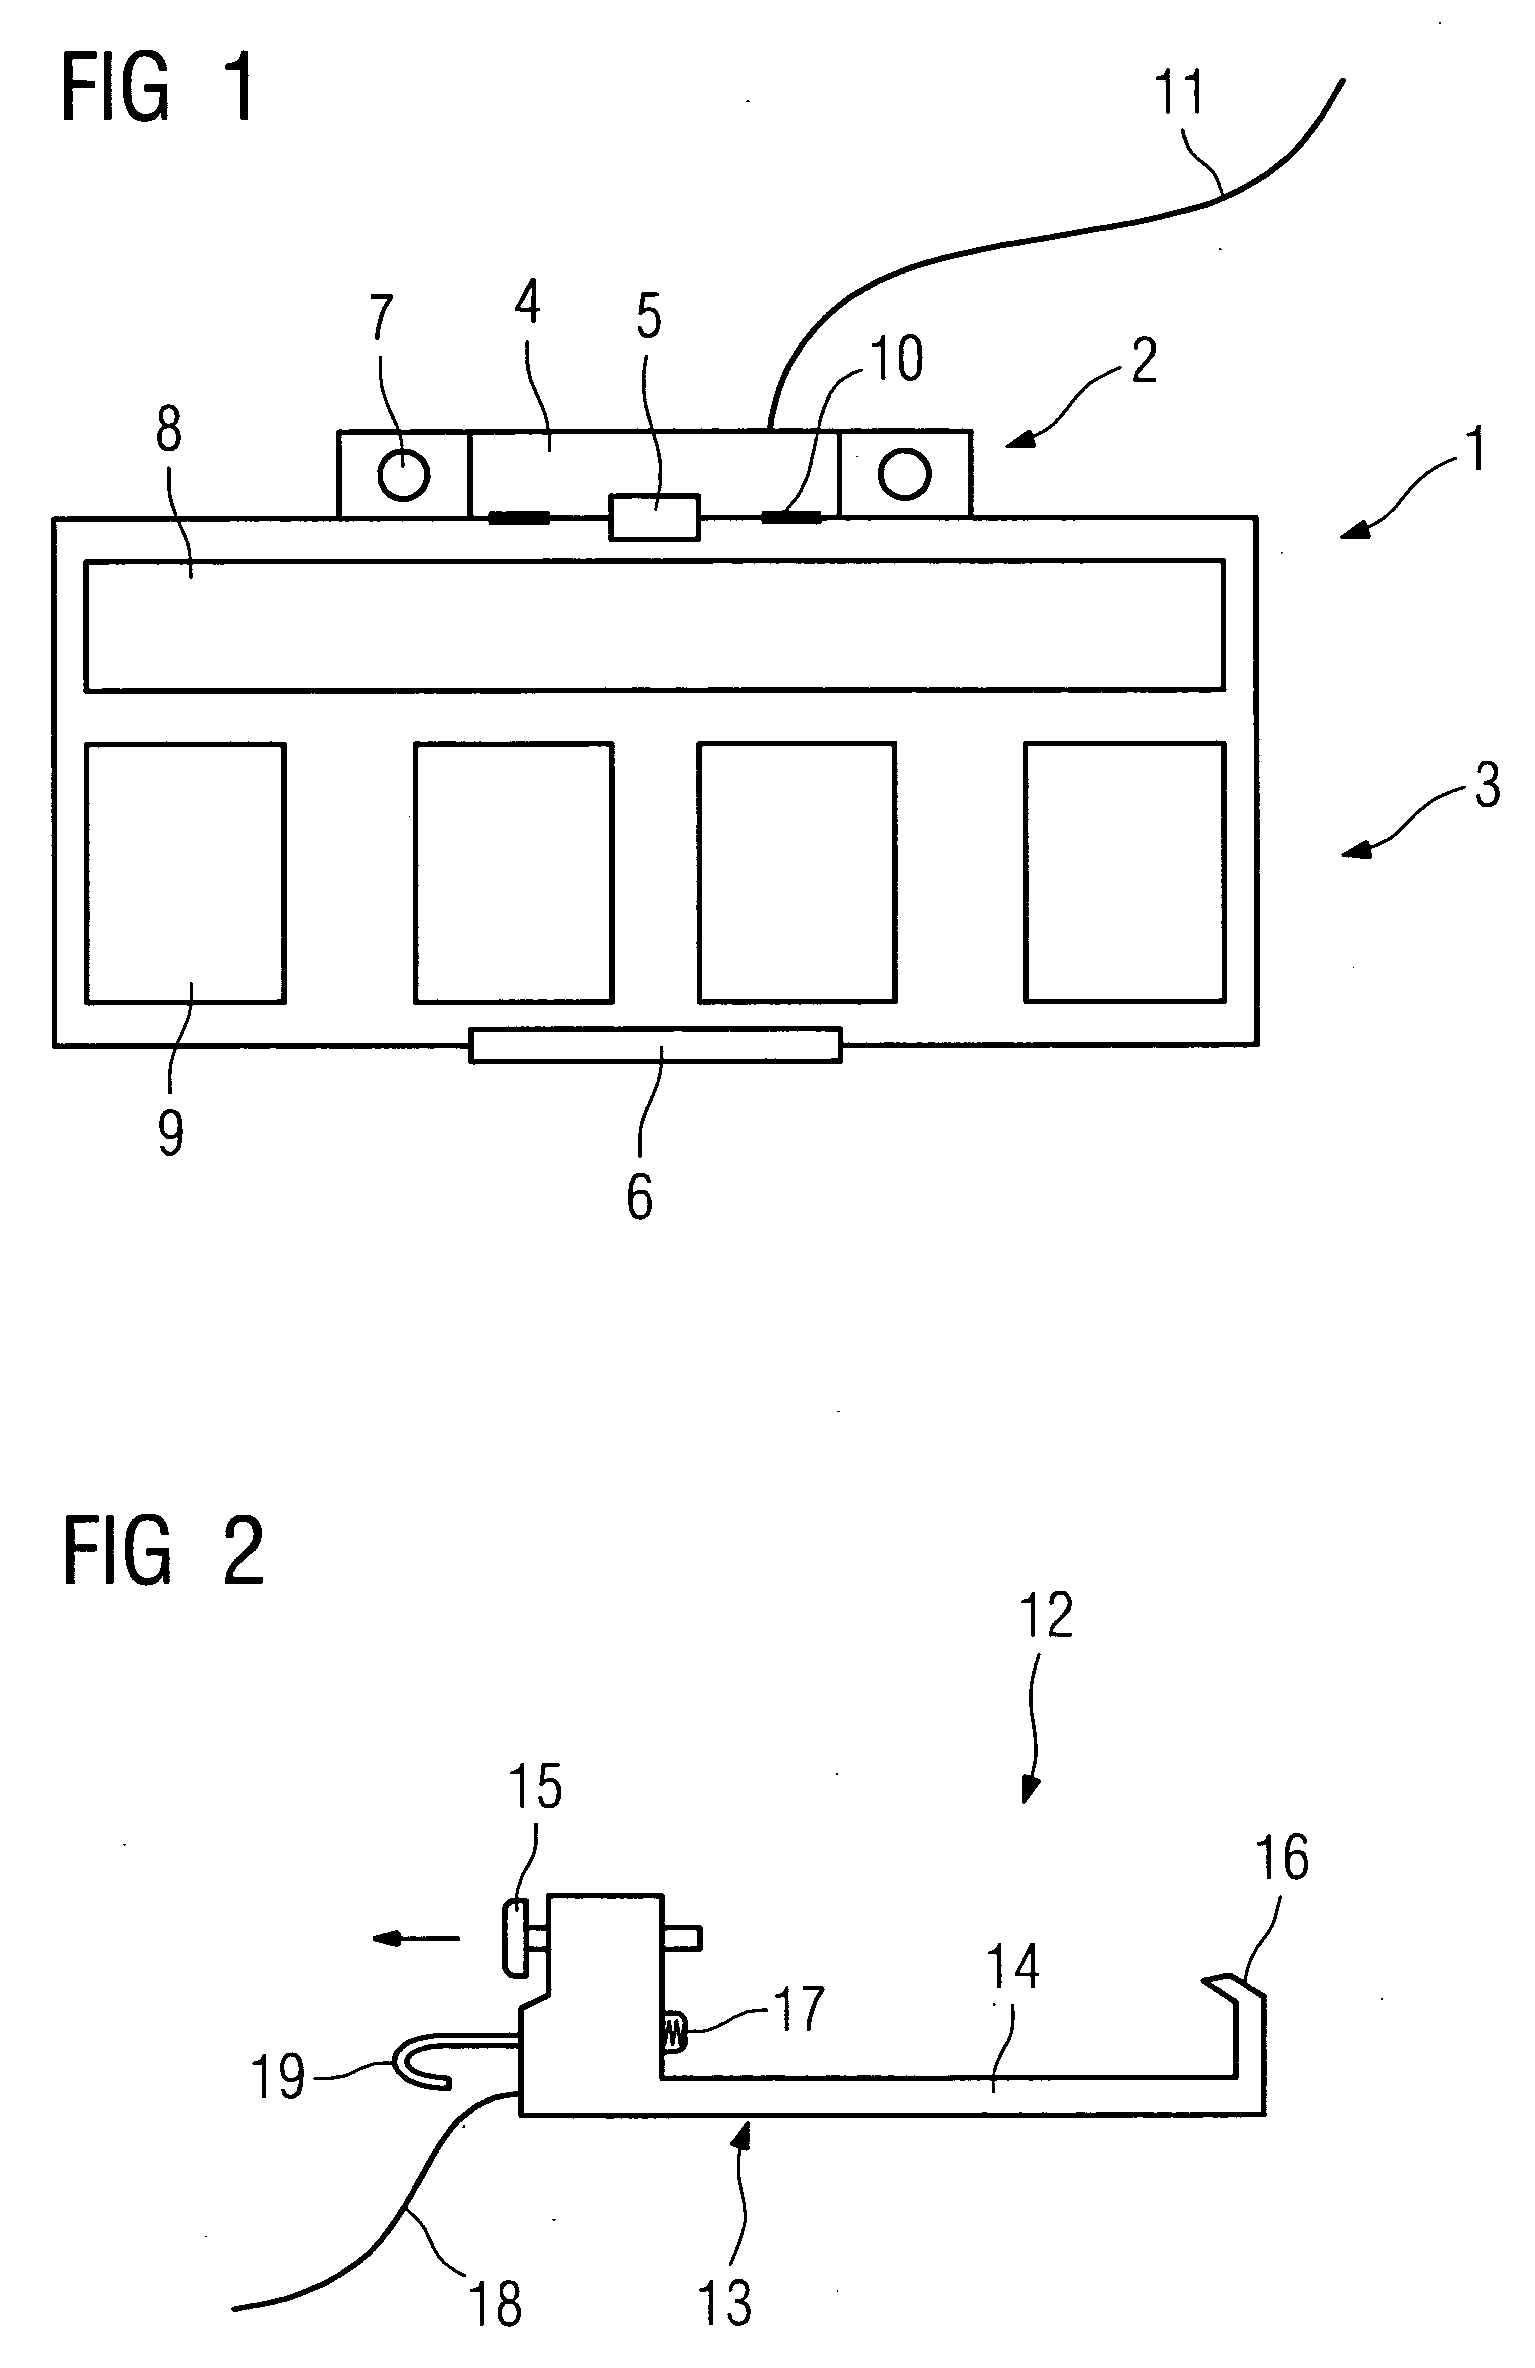 Charging apparatus for charging a wireless operating element of a medical device